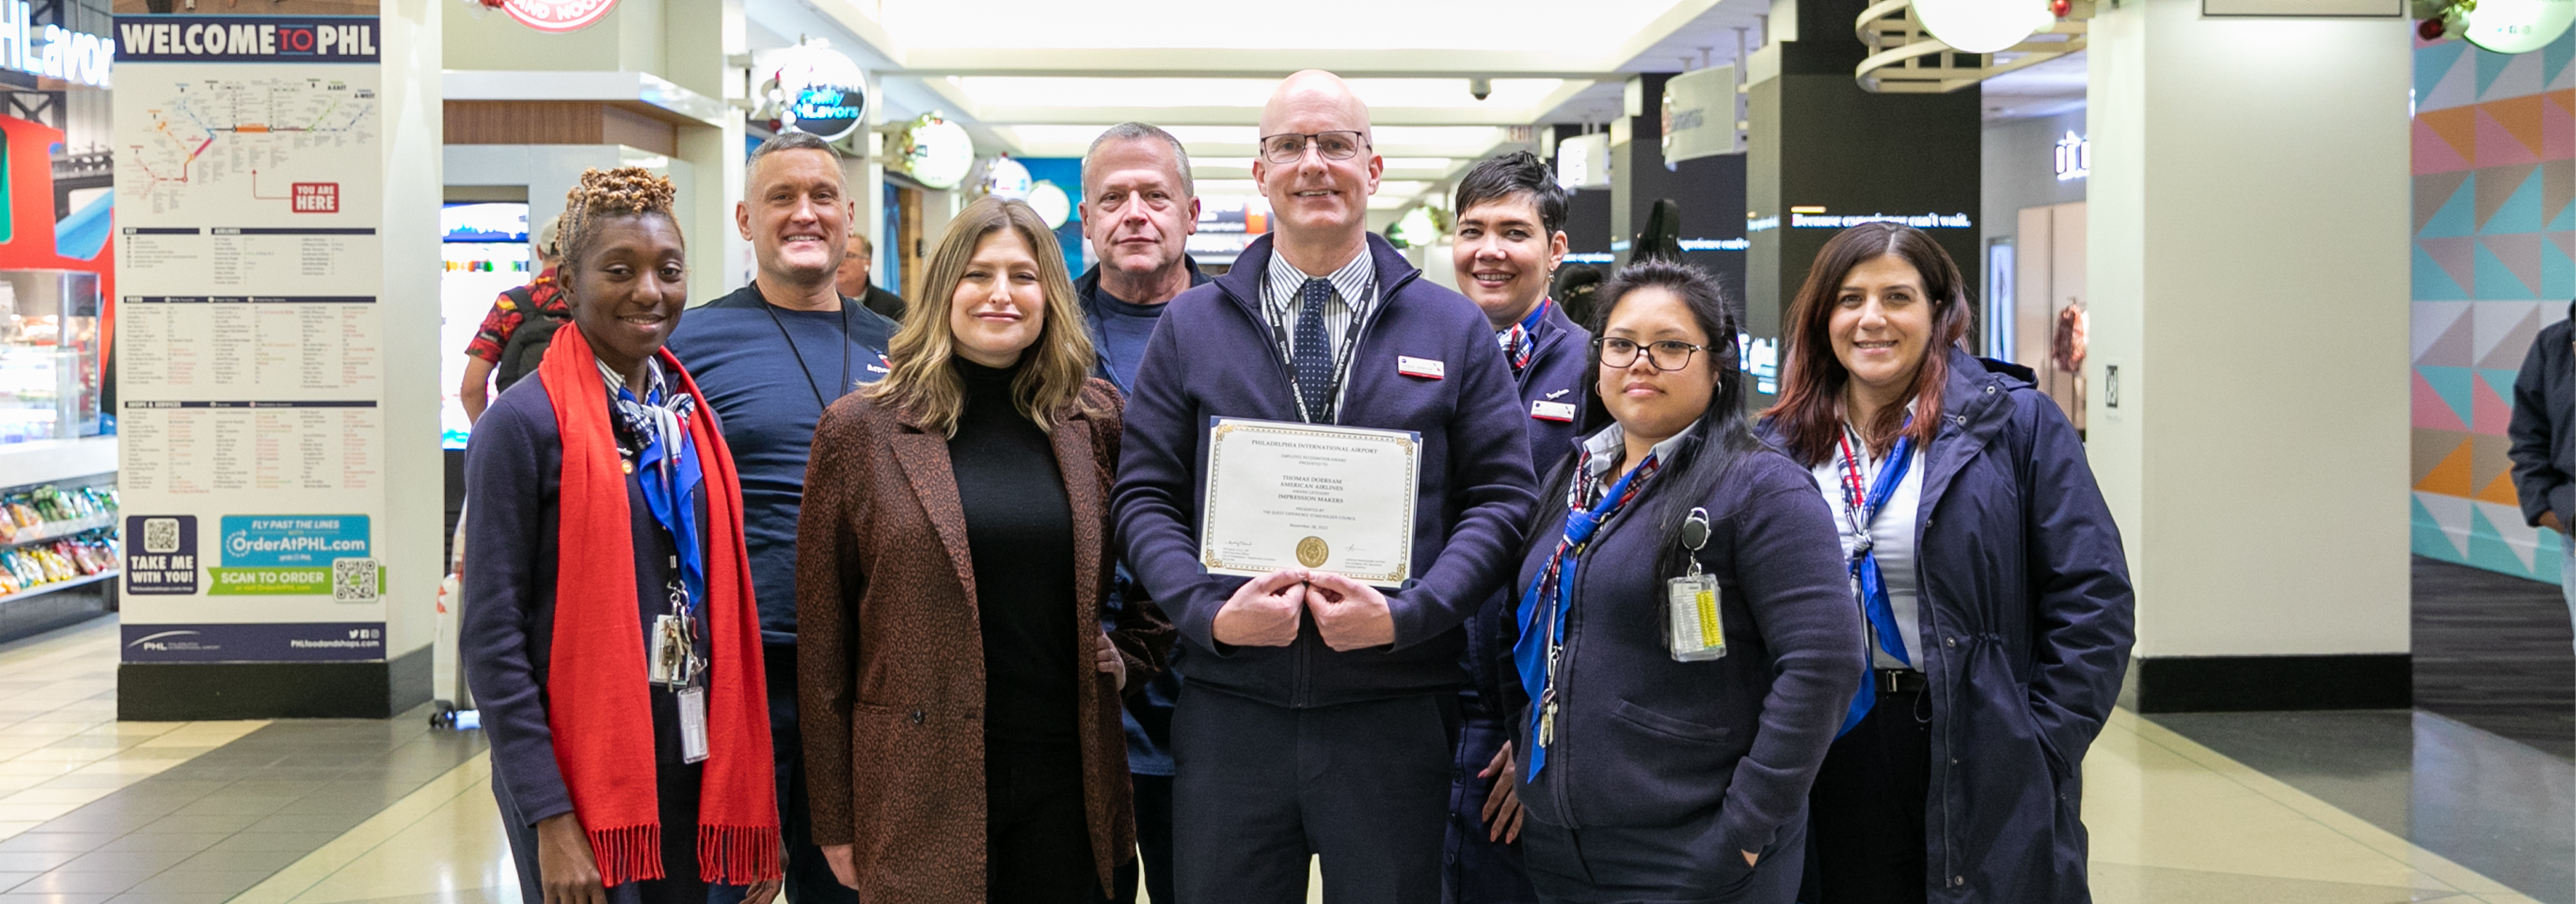 Thomas with GX team in terminals holding award